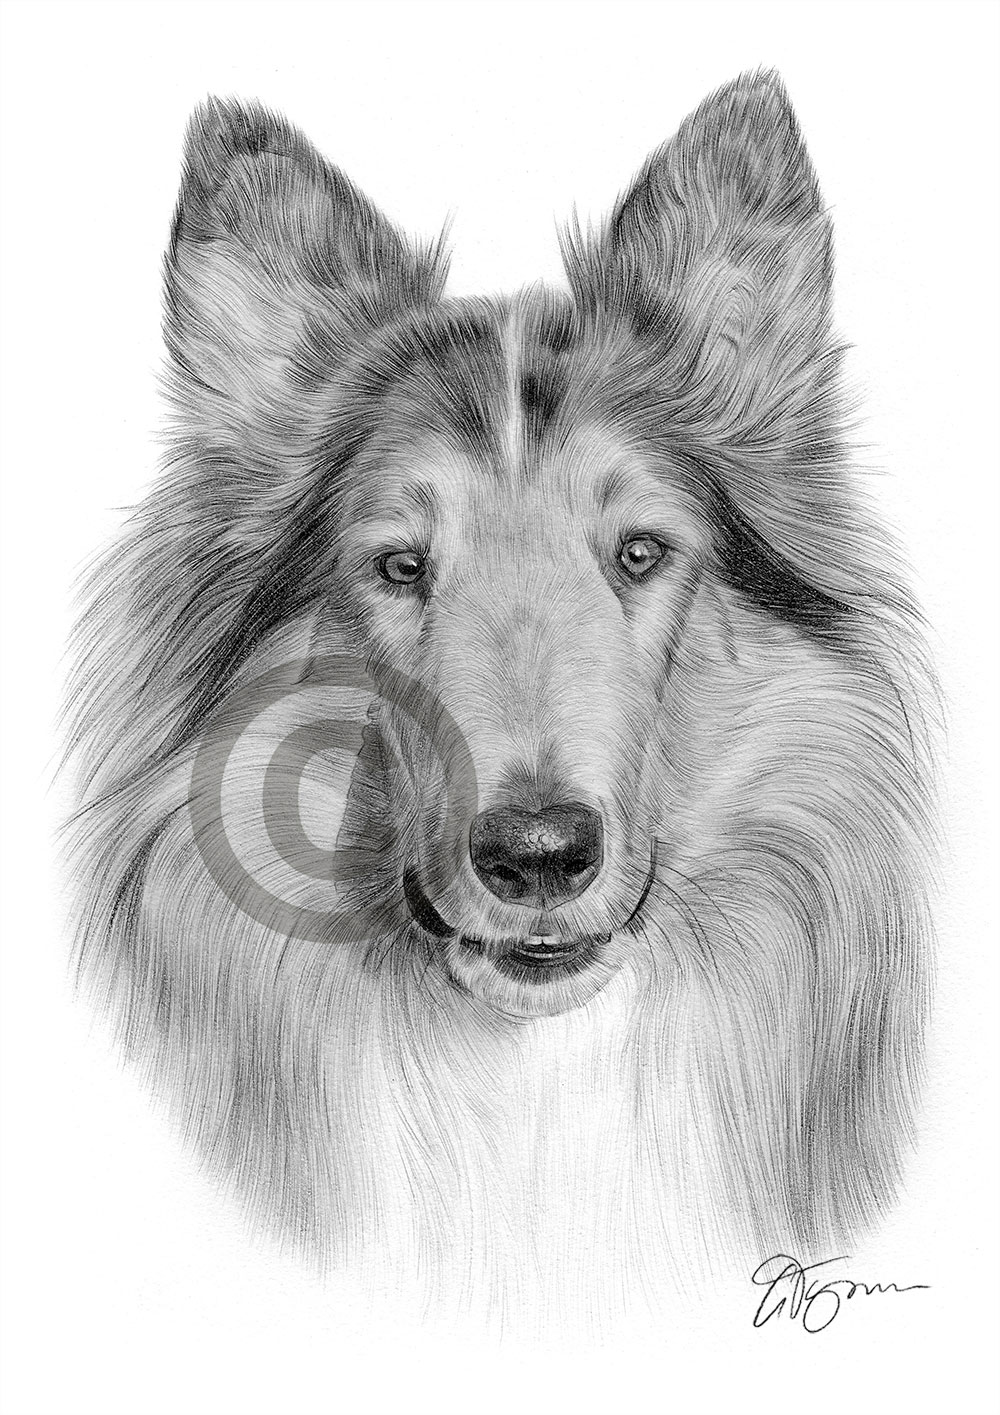 Pencil drawing of a young Rough Collie by artist Gary Tymon